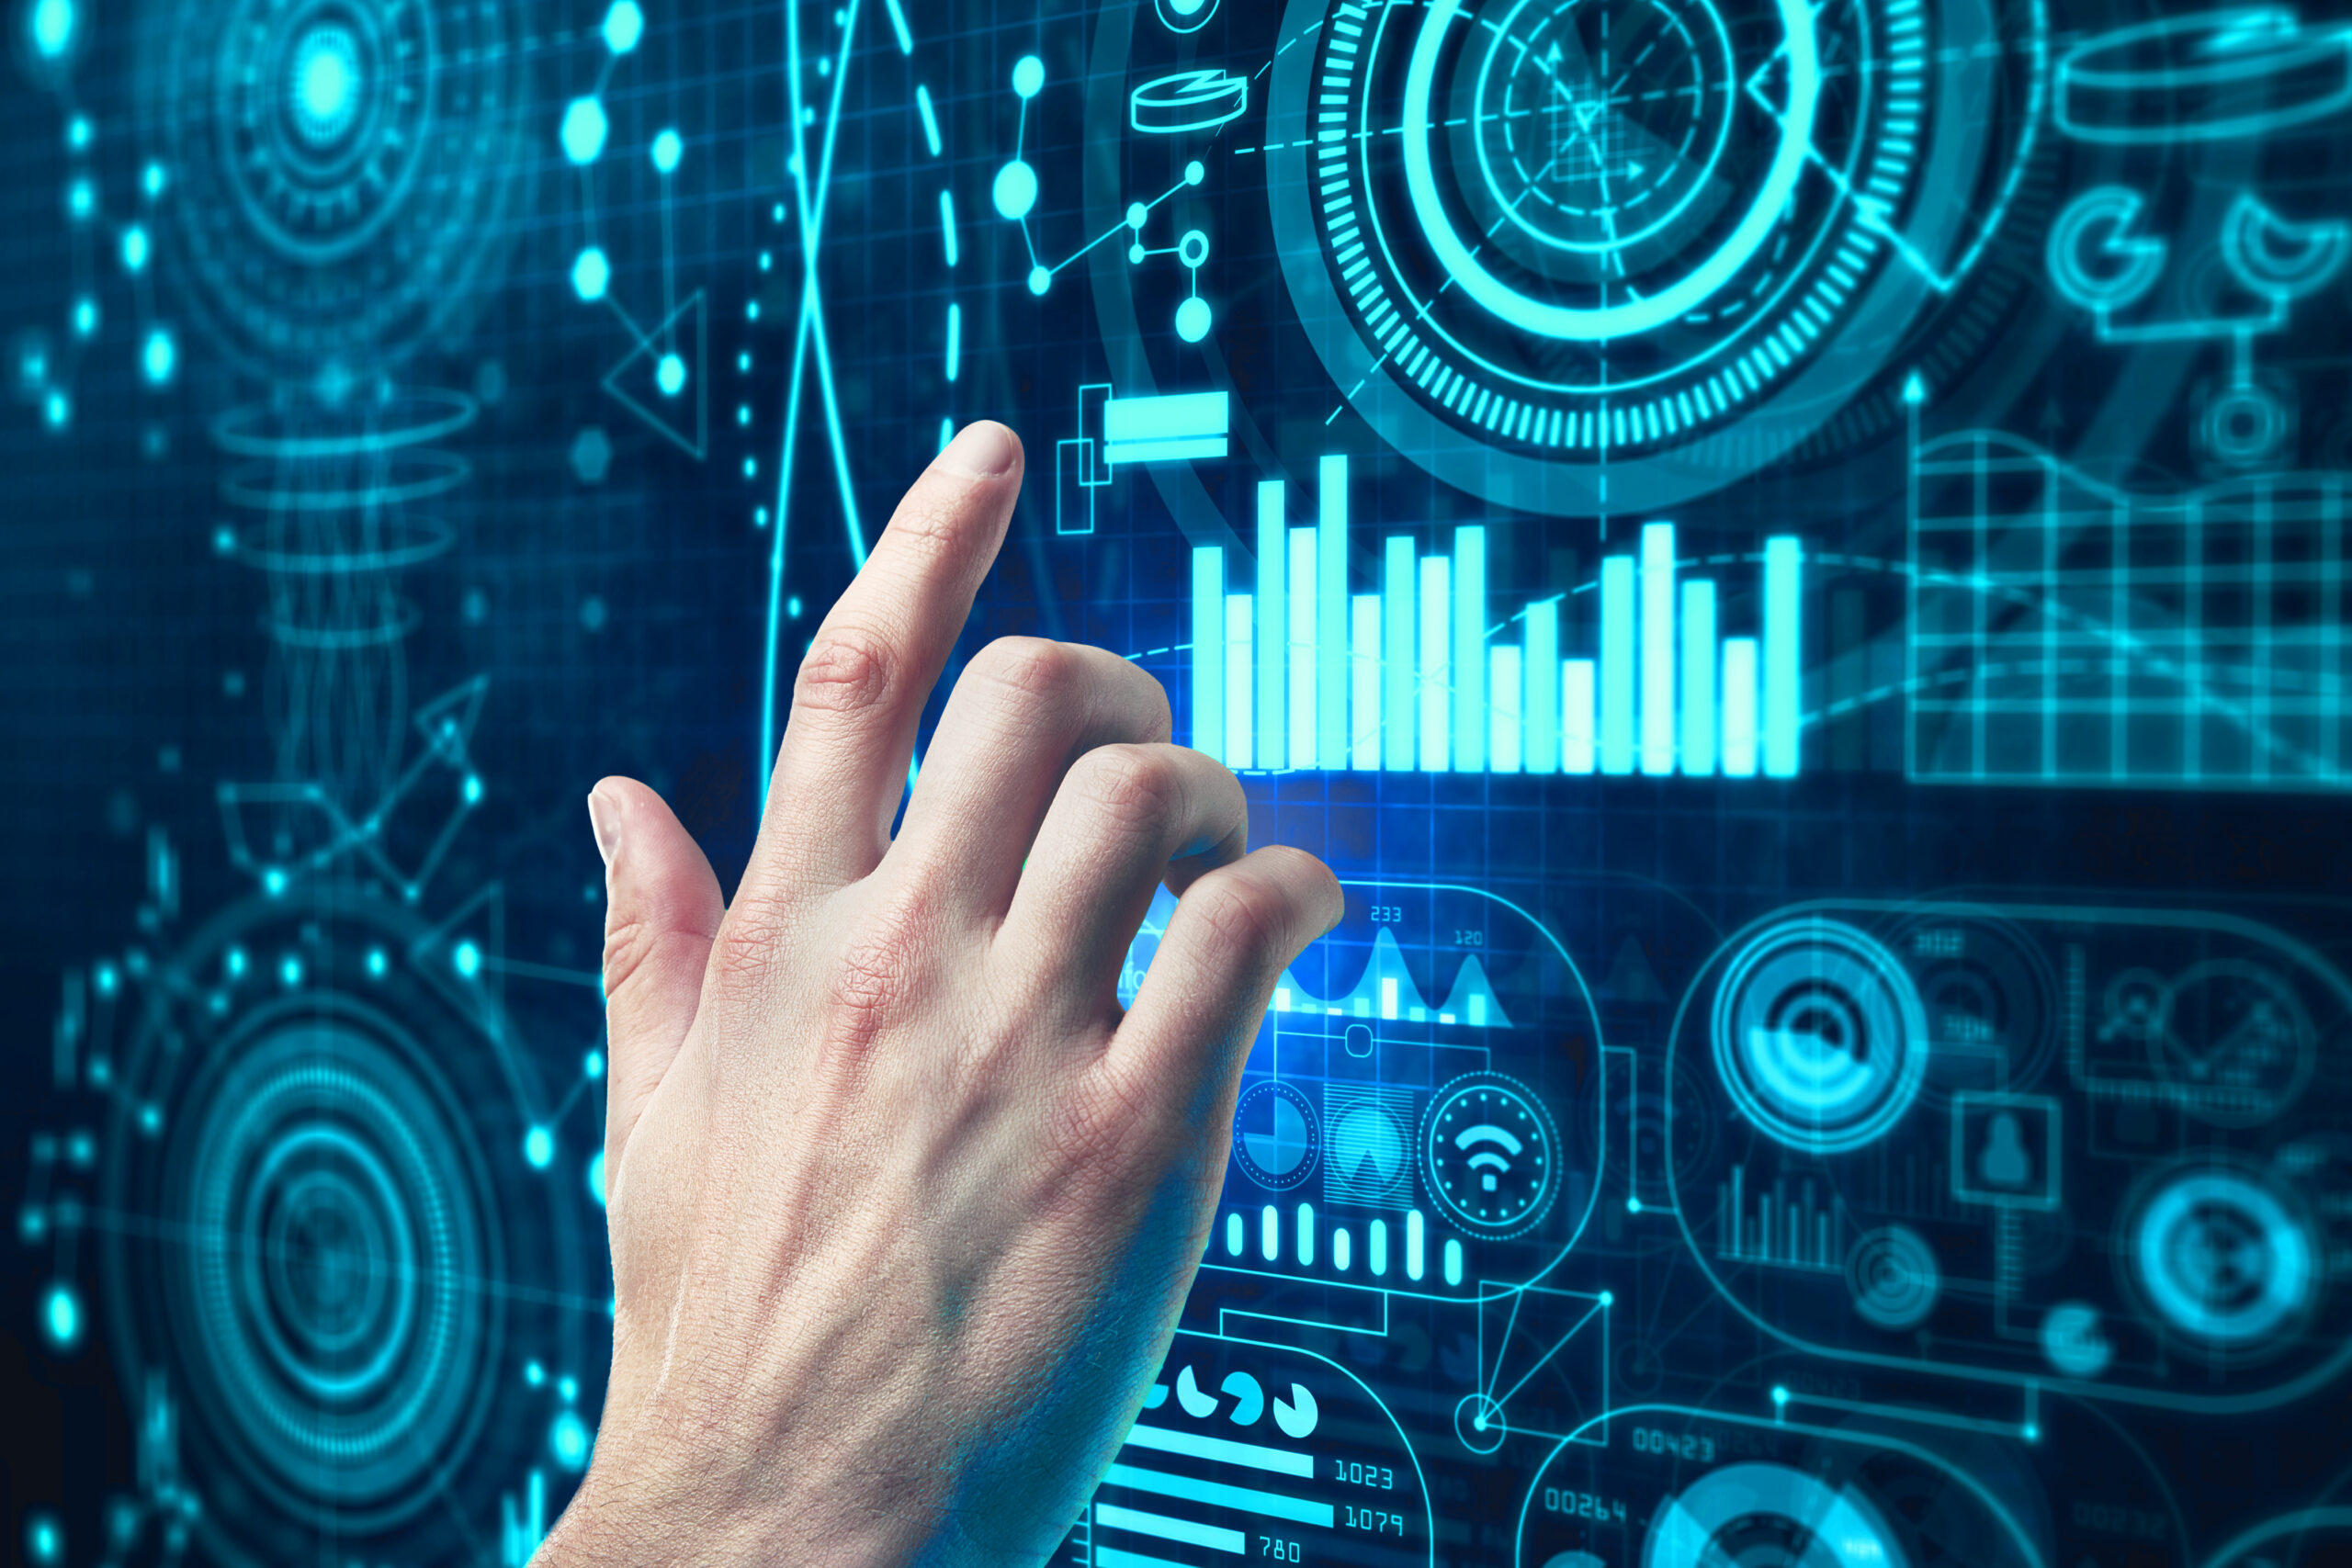 A hand touching a holographic interface with data analytics visualization, symbolizing Entrapeer's innovative approach to market research for startups as discussed in the blog titled '4 Ways Entrapeer Revolutionizes Market Research for Startups'